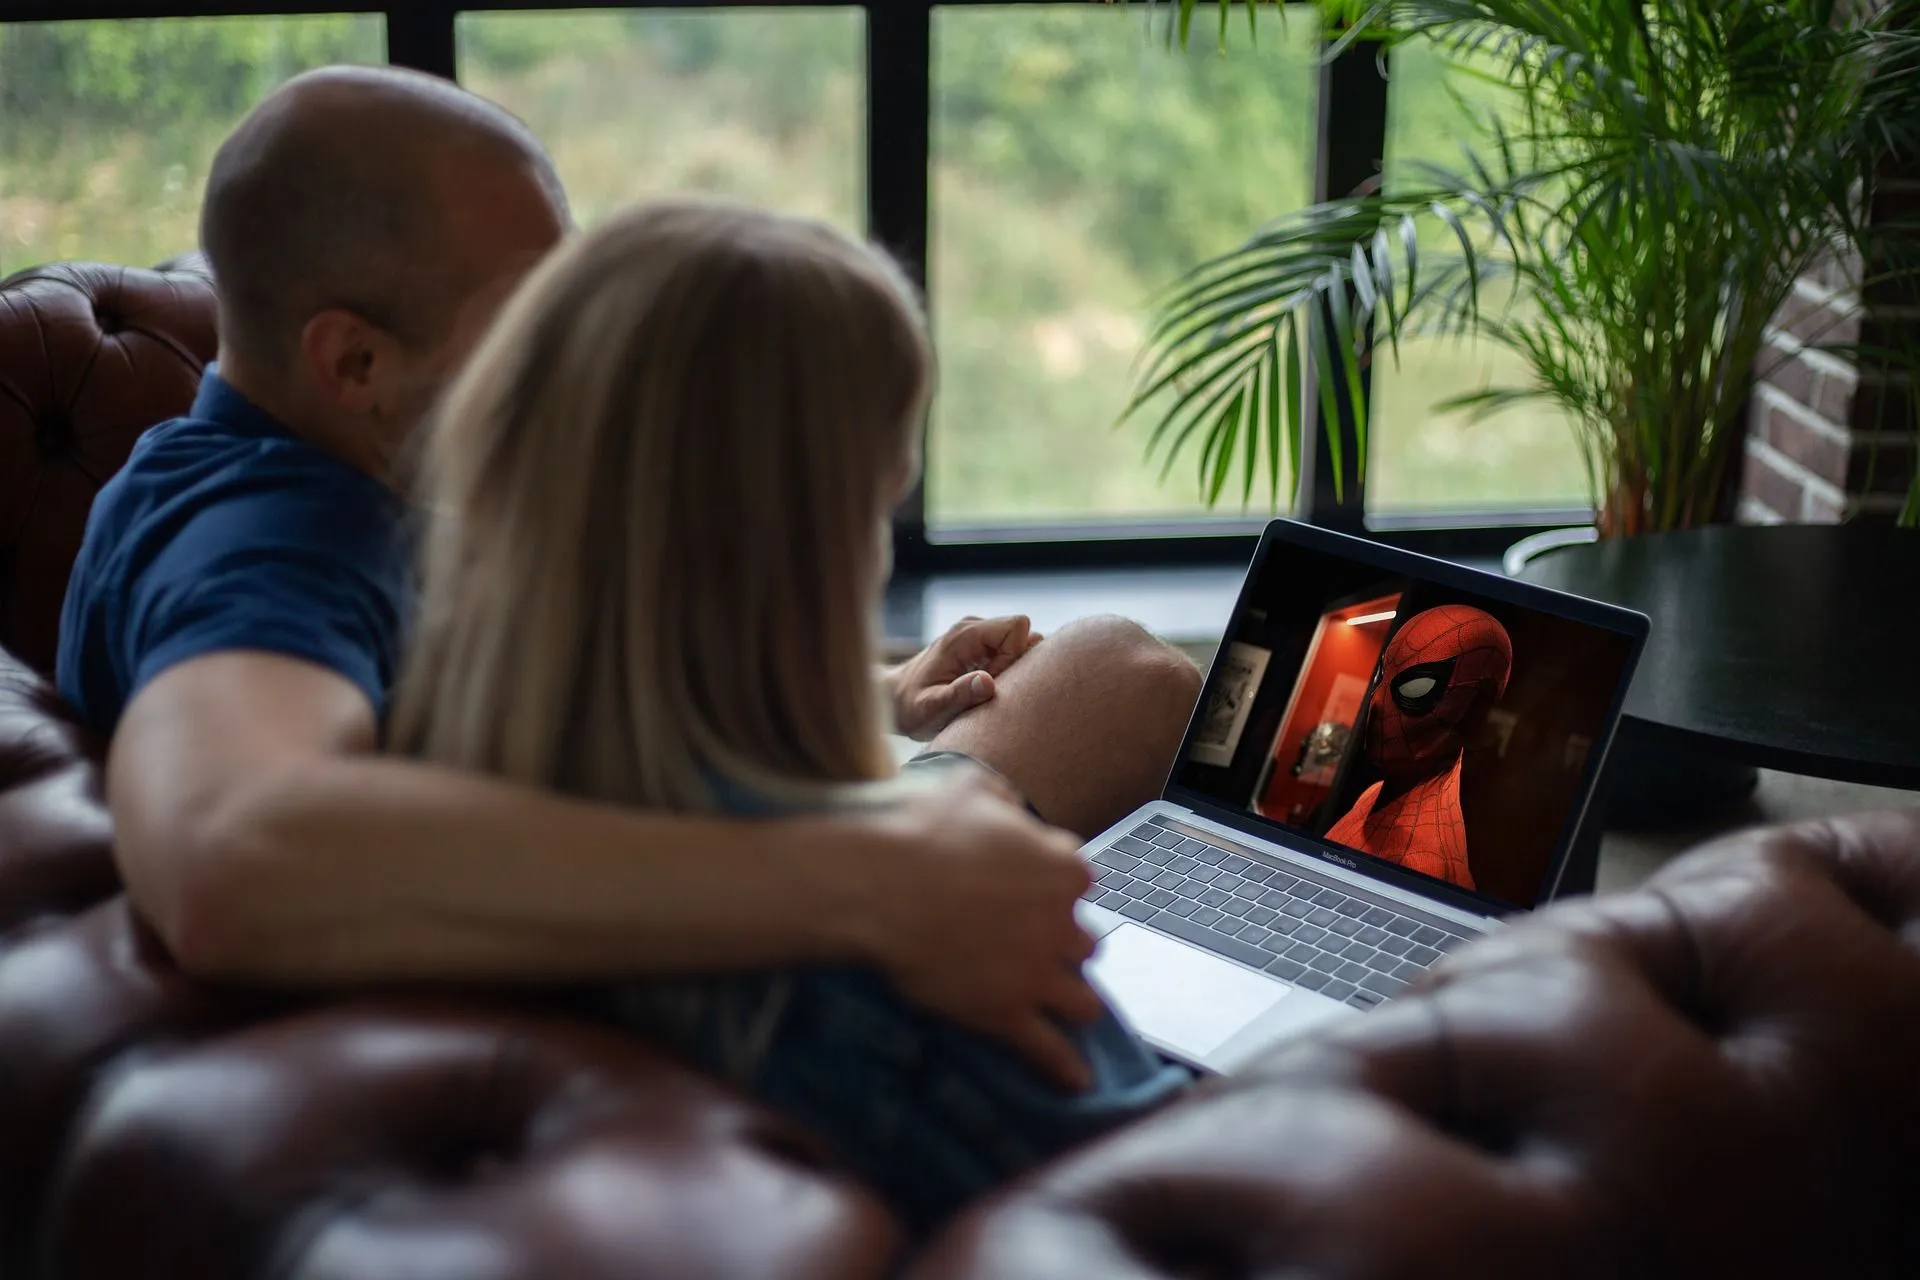 If you have an internet connection, you can use an online video sharing service like YouTube to watch movies on your Windows laptop.